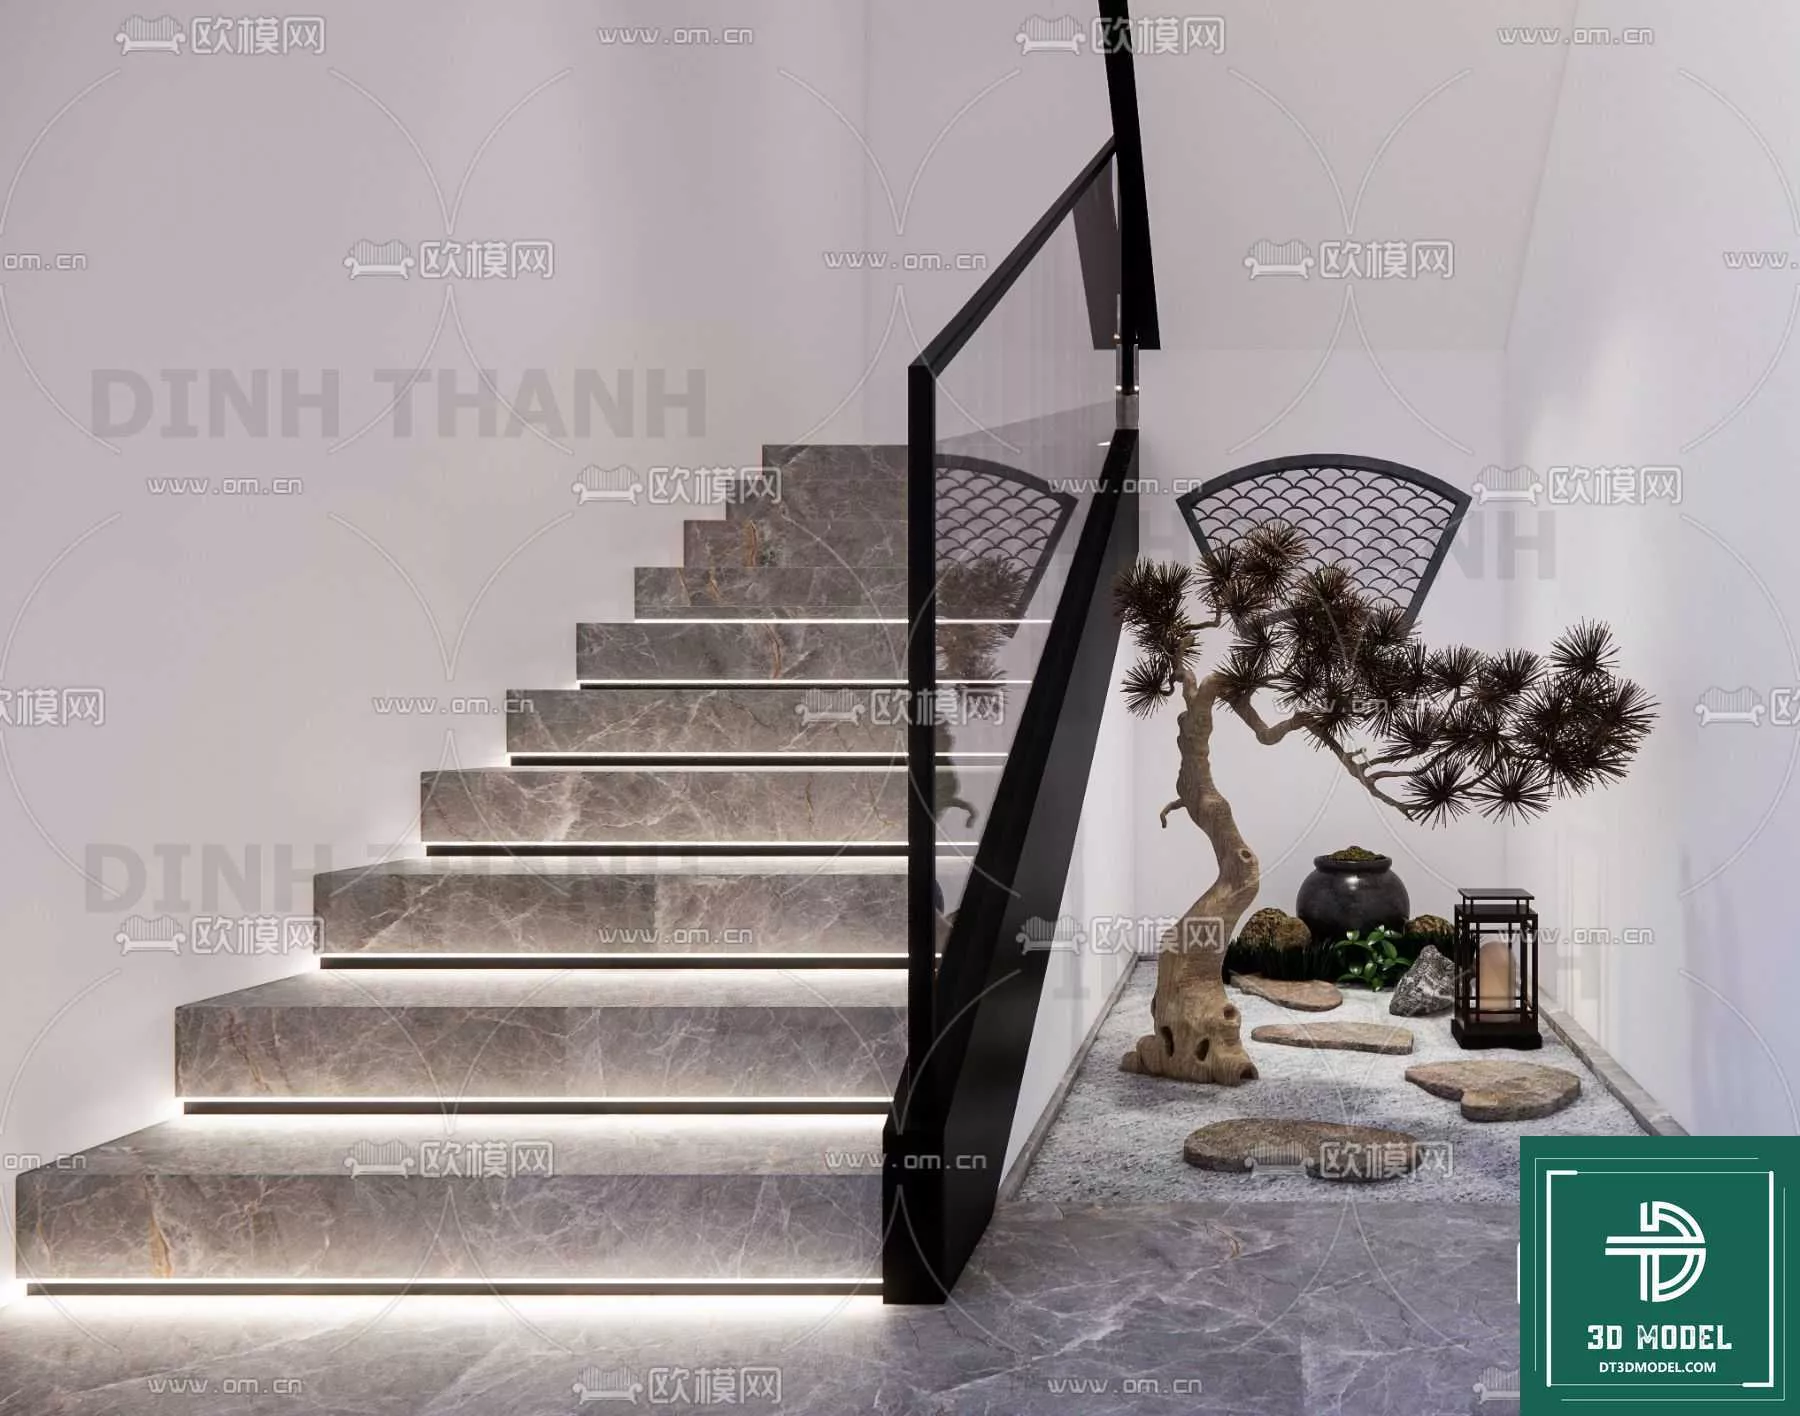 MODERN STAIR - SKETCHUP 3D MODEL - VRAY OR ENSCAPE - ID14184